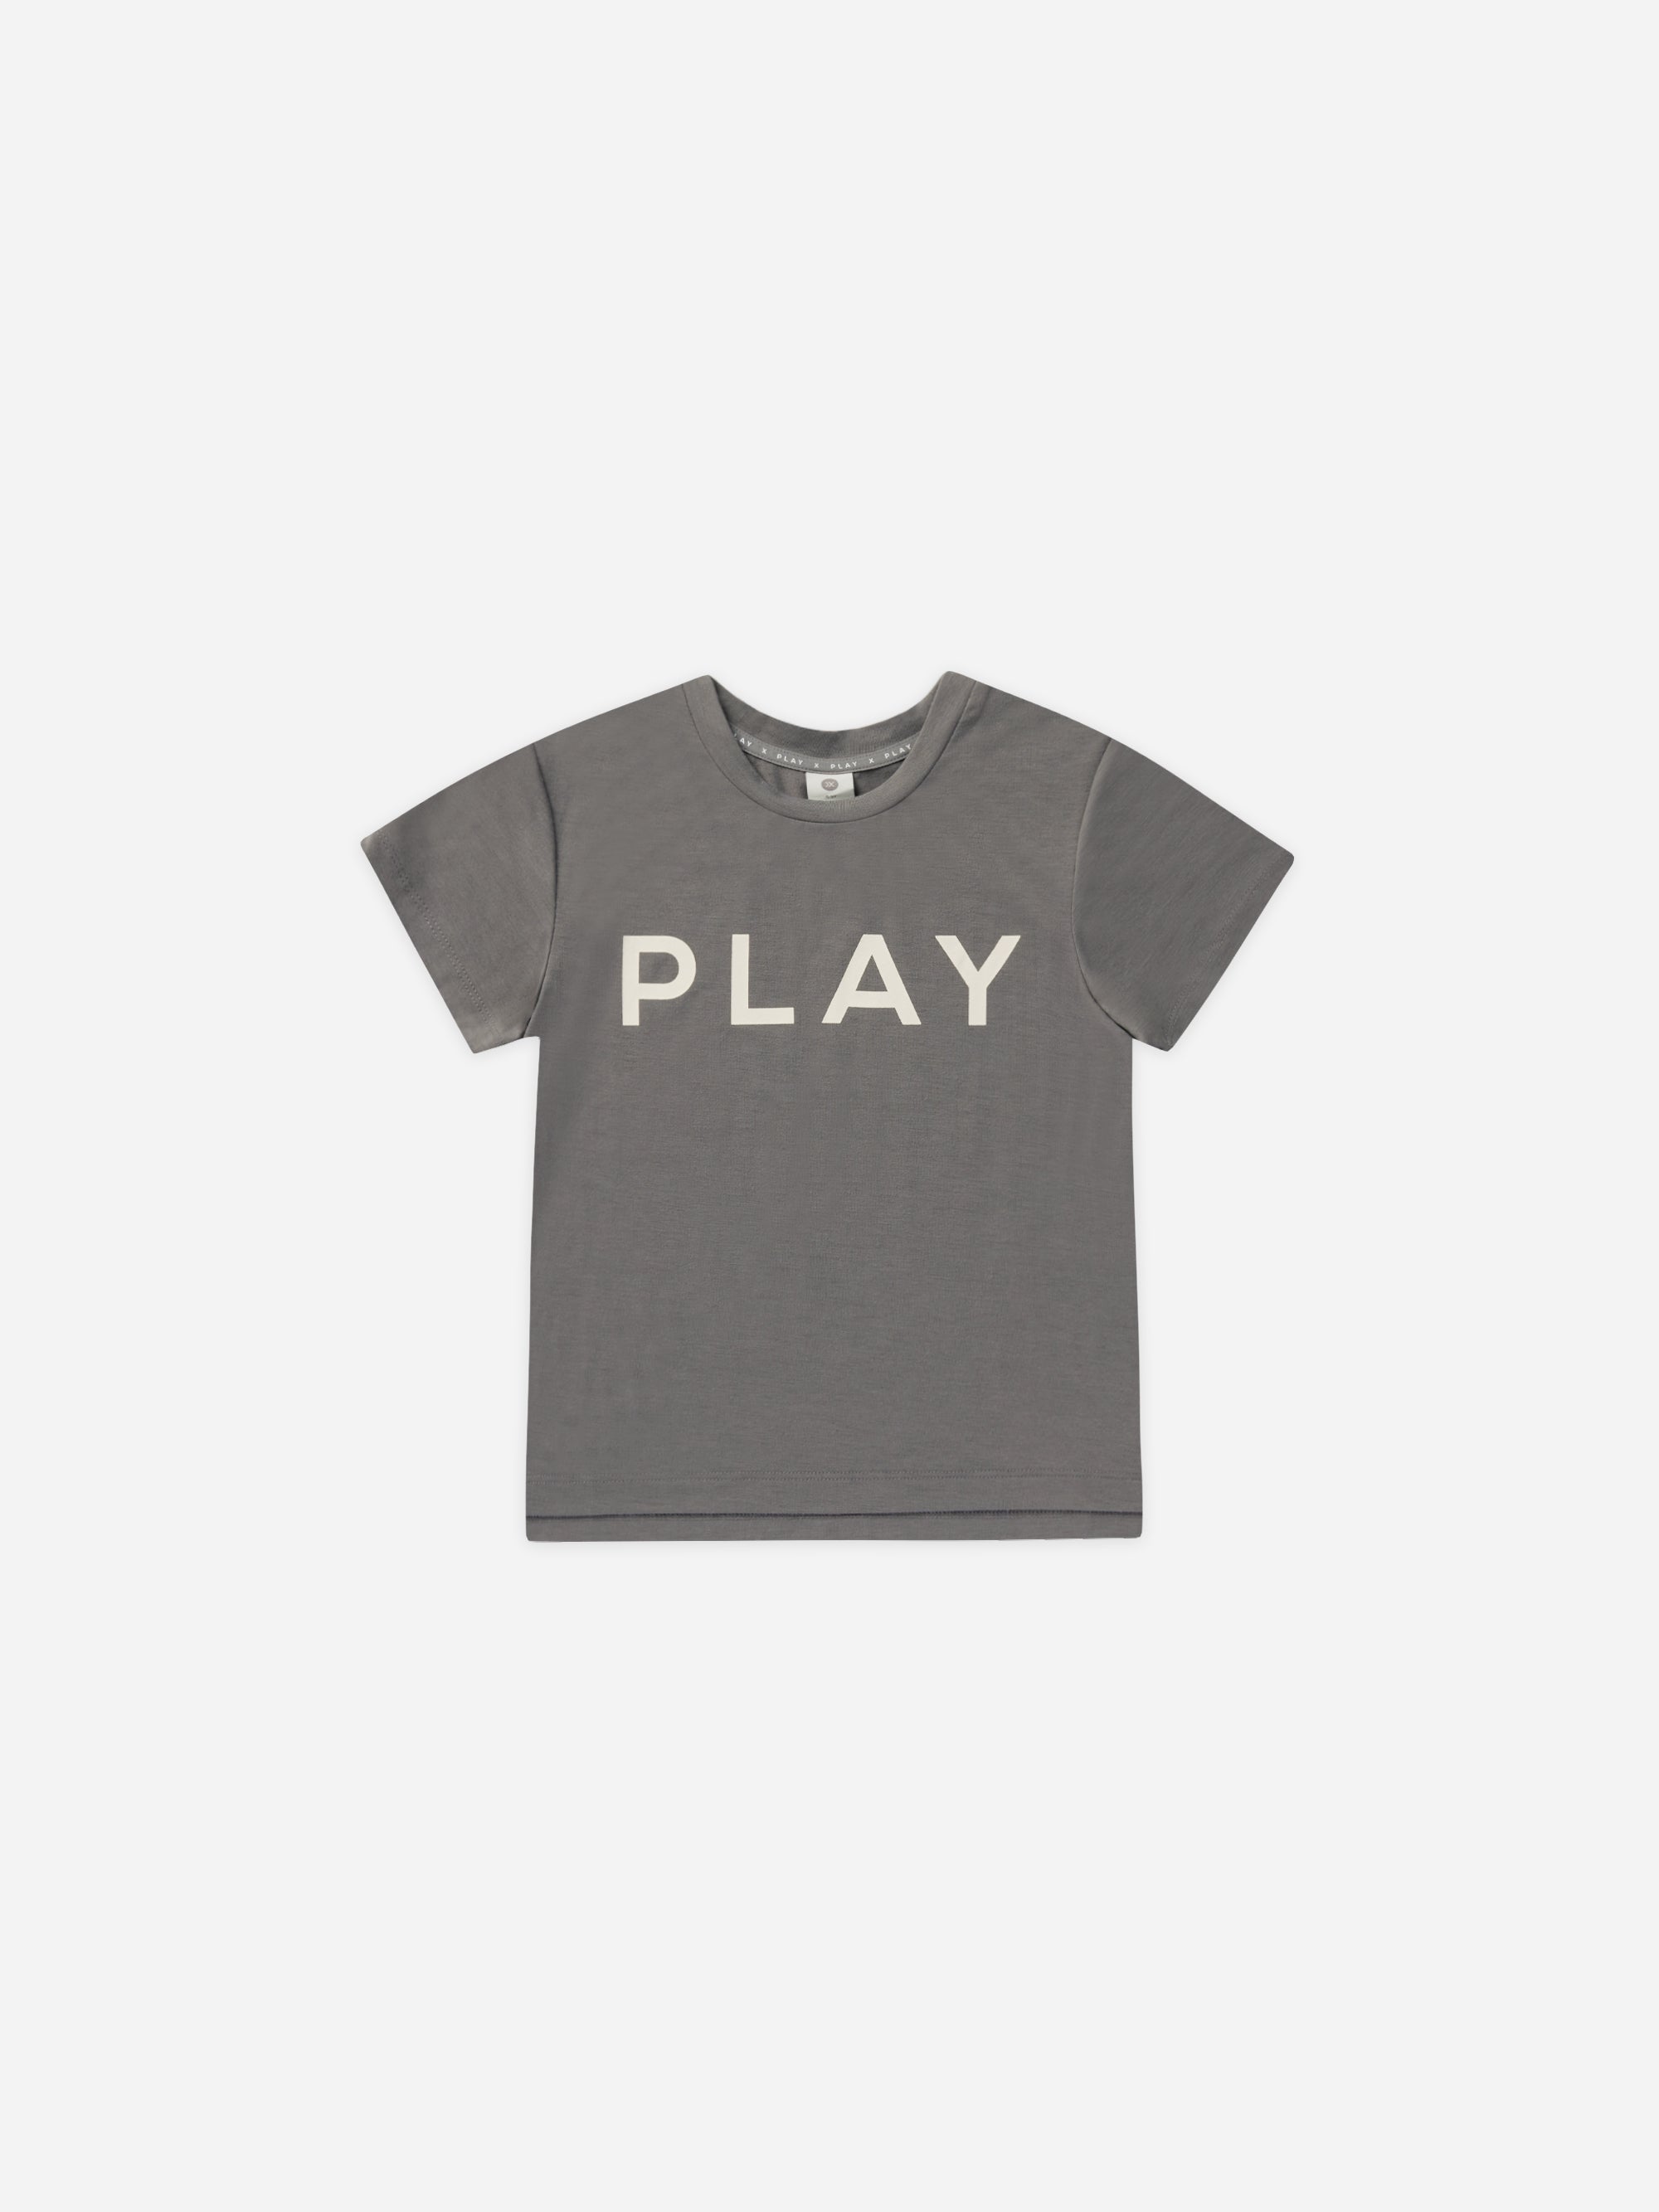 Cove Essential Tee || Grey - Rylee + Cru | Kids Clothes | Trendy Baby Clothes | Modern Infant Outfits |